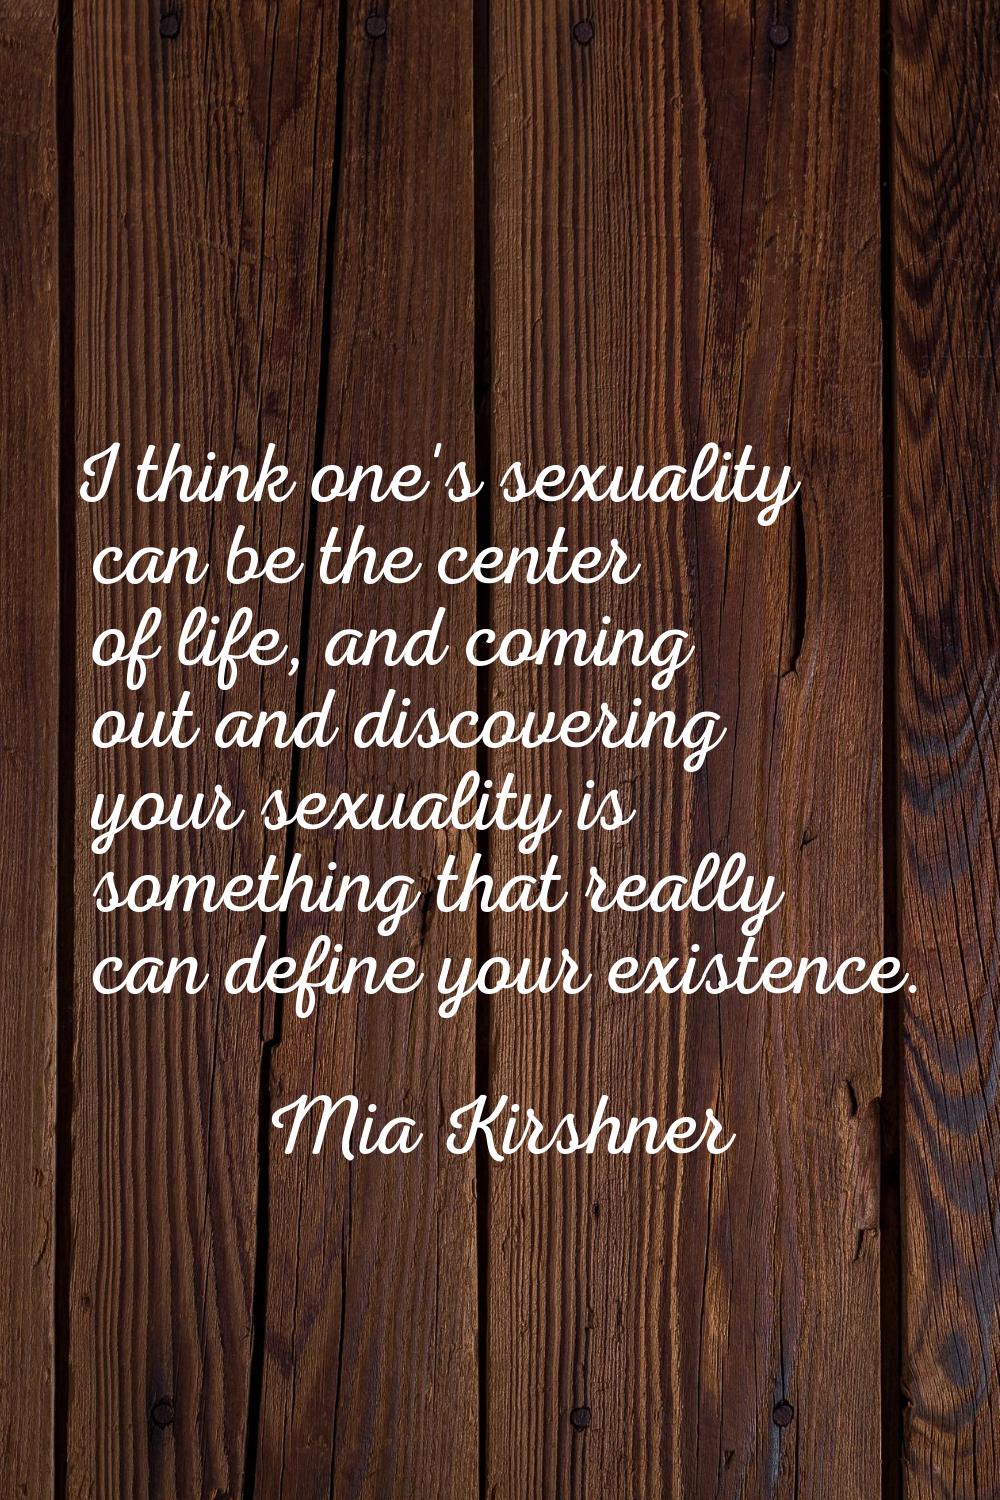 I think one's sexuality can be the center of life, and coming out and discovering your sexuality is